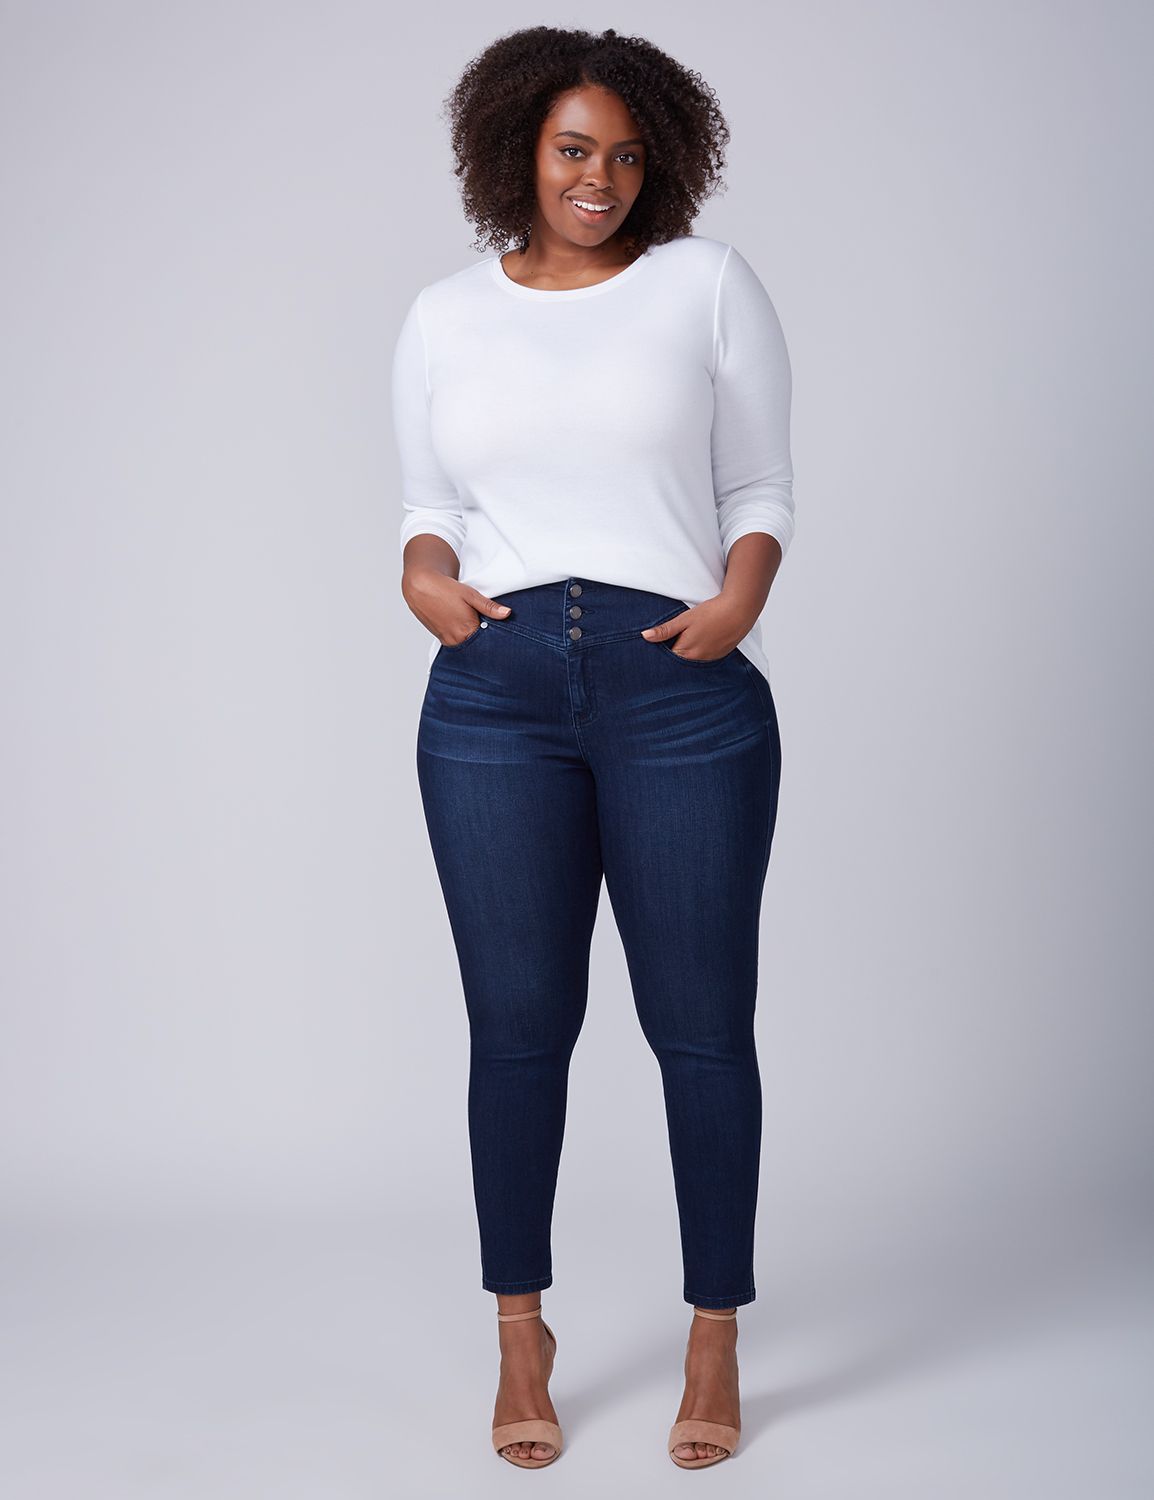 Plus Size Jeans | Styles Including Skinny, Bootcut And Boyfriend Jeans ...